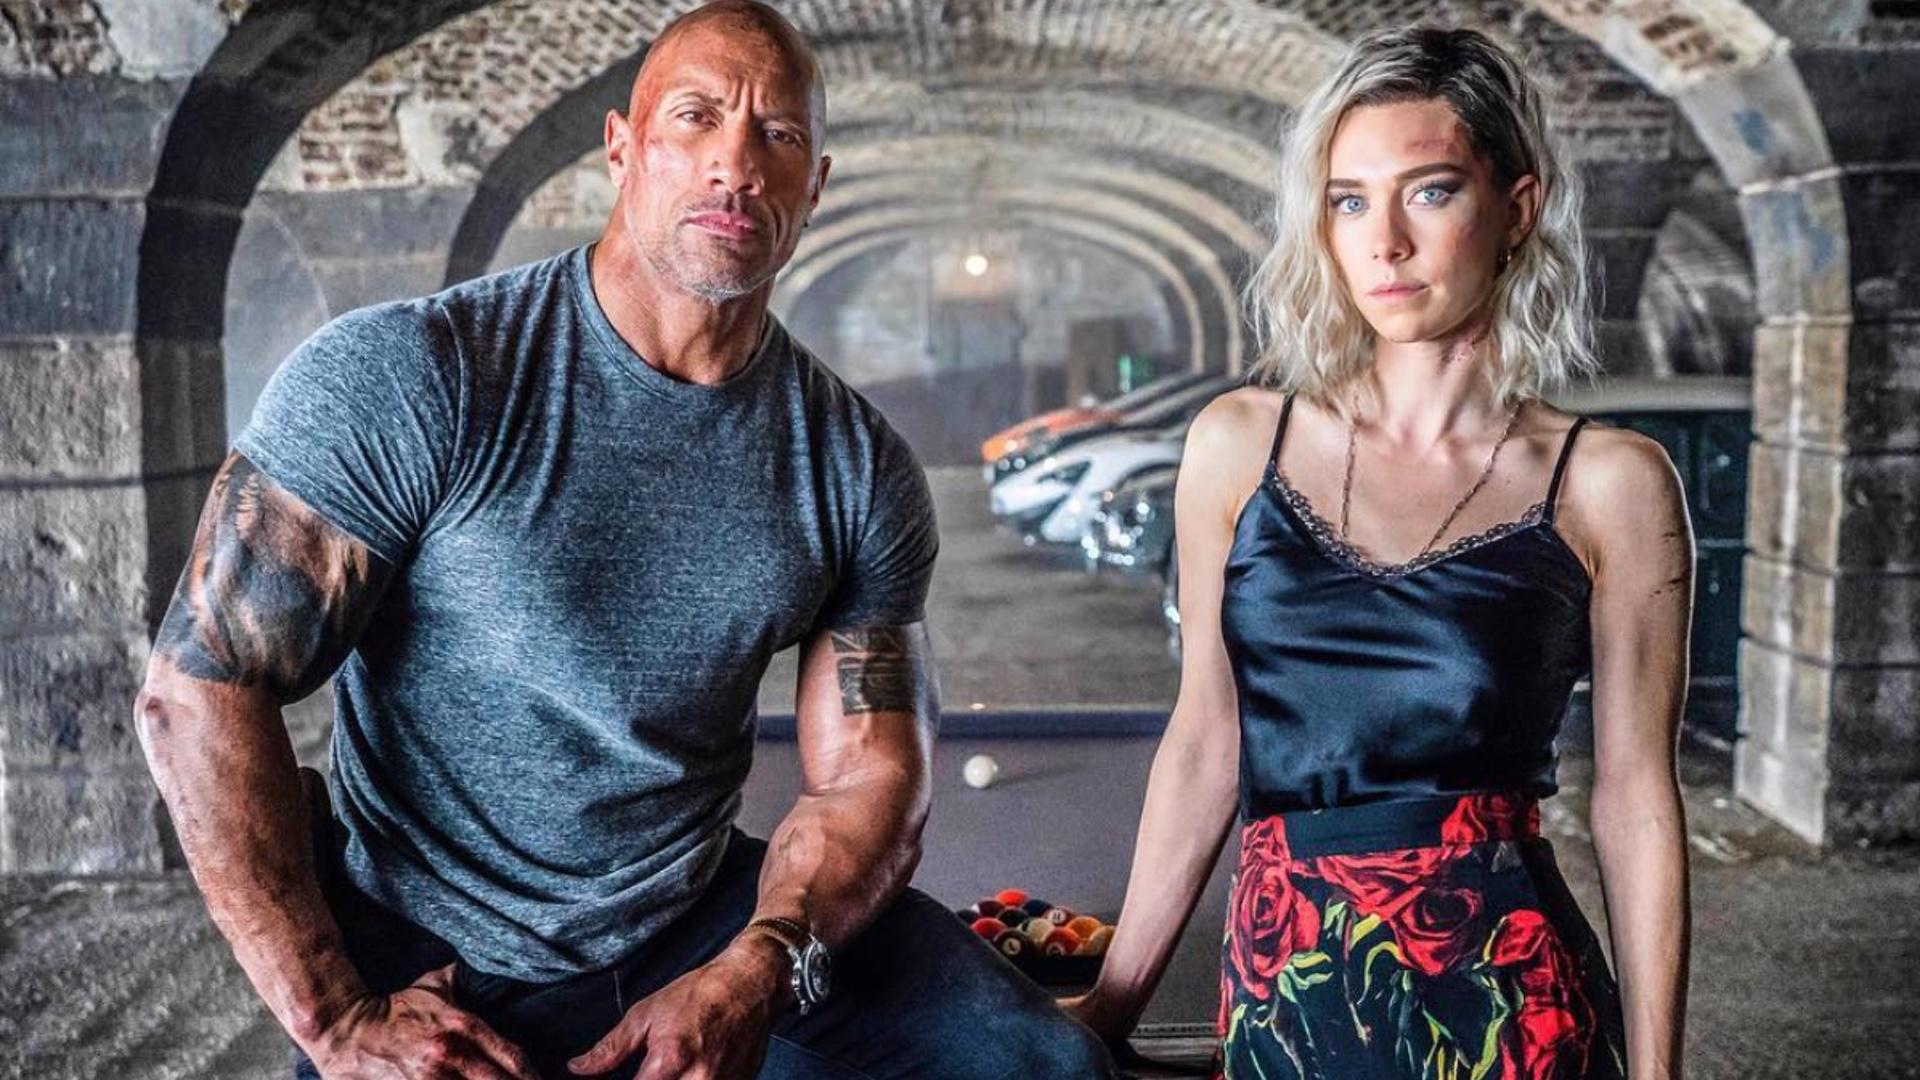 New HOBBS AND SHAW Photo Gives Us Our First Look at Vanessa Kirby as